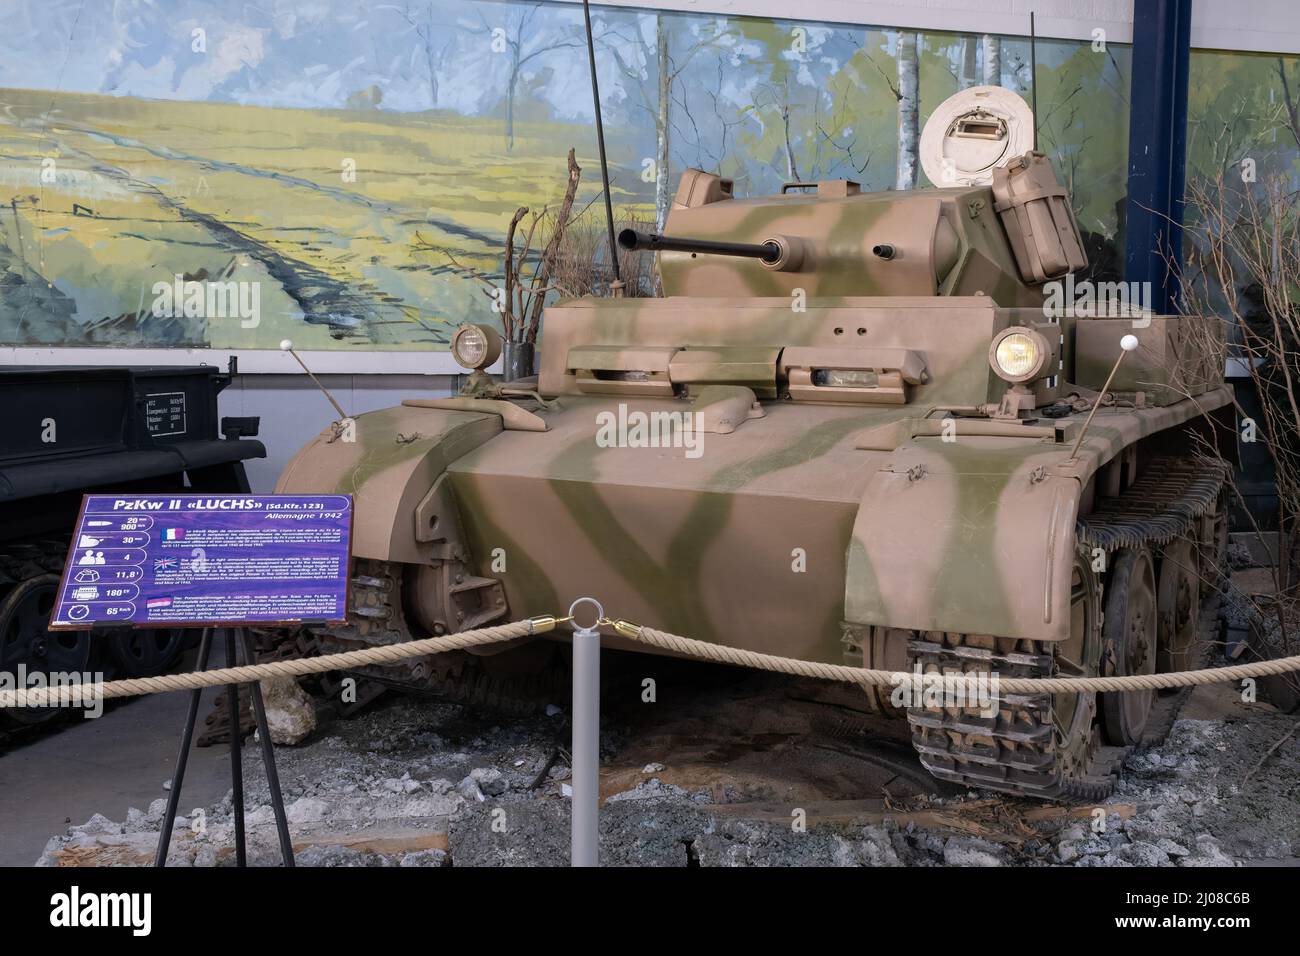 Saumur, France - February 26, 2022:  German Lynx or Luchs (Panzer II Sd. Kfz. 123). Tank museum in Saumur (Musee des Blindes). Second world war exhibi Stock Photo